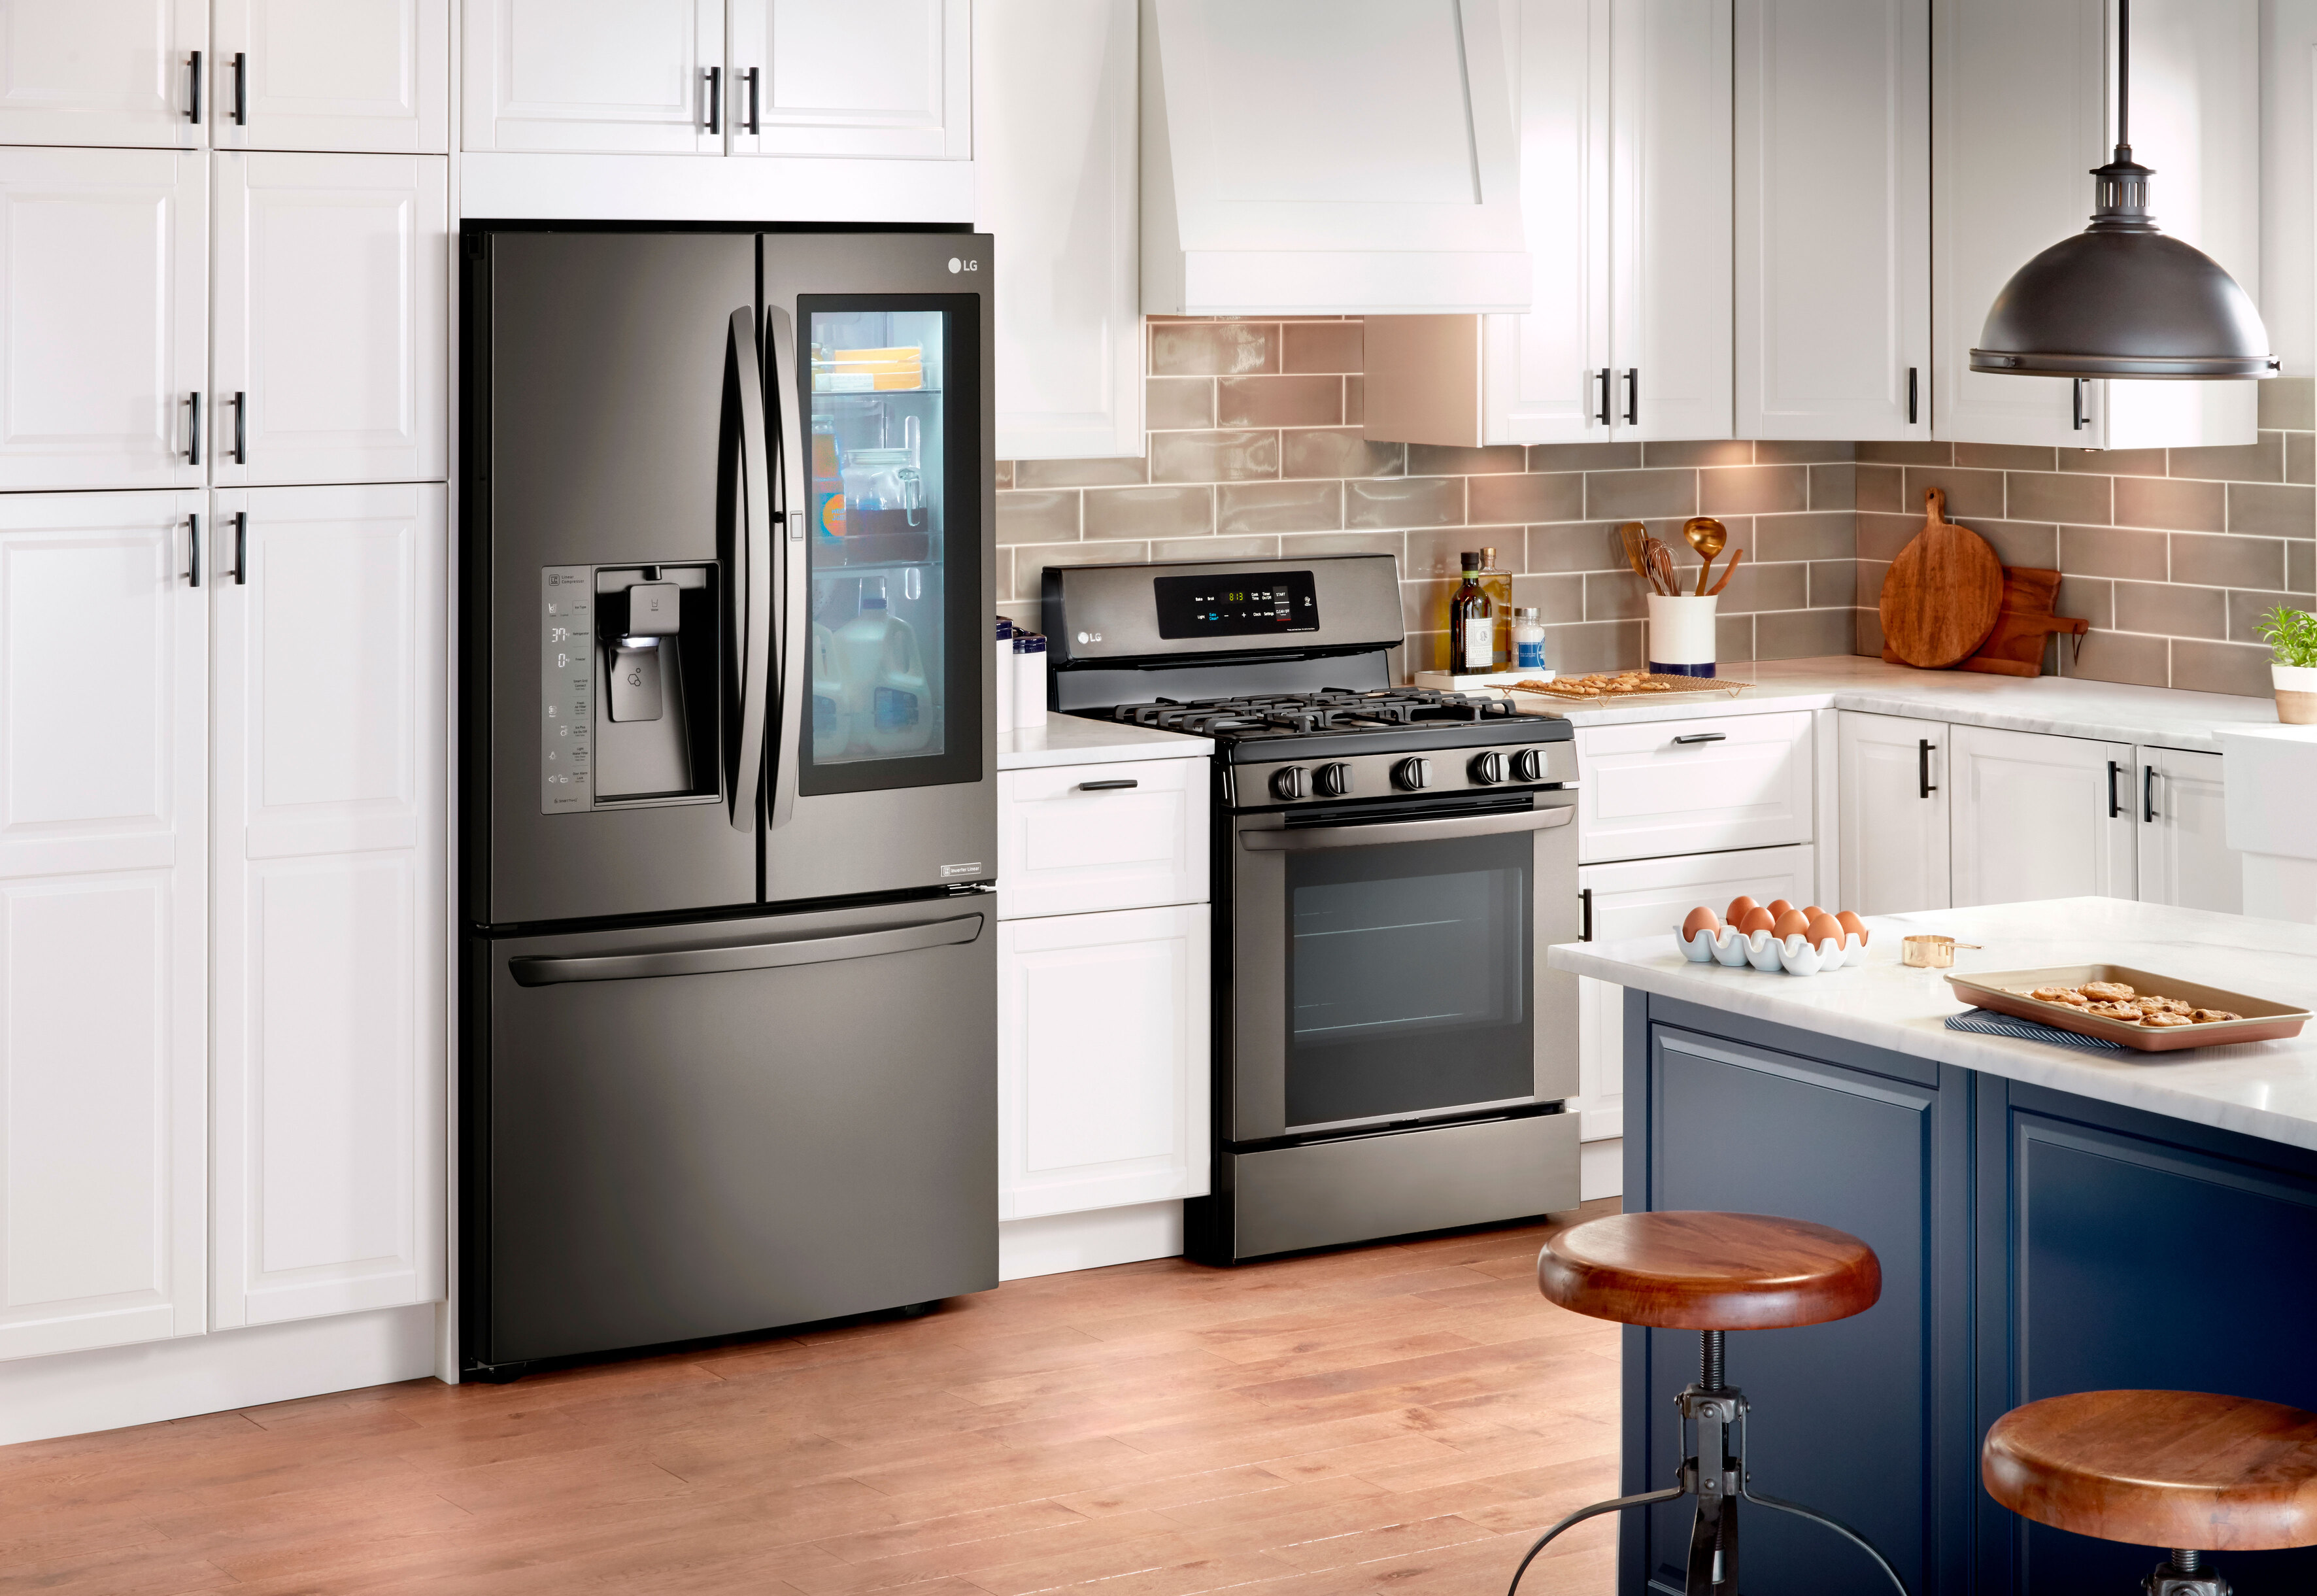 LG Appliances Prep for the Holidays 